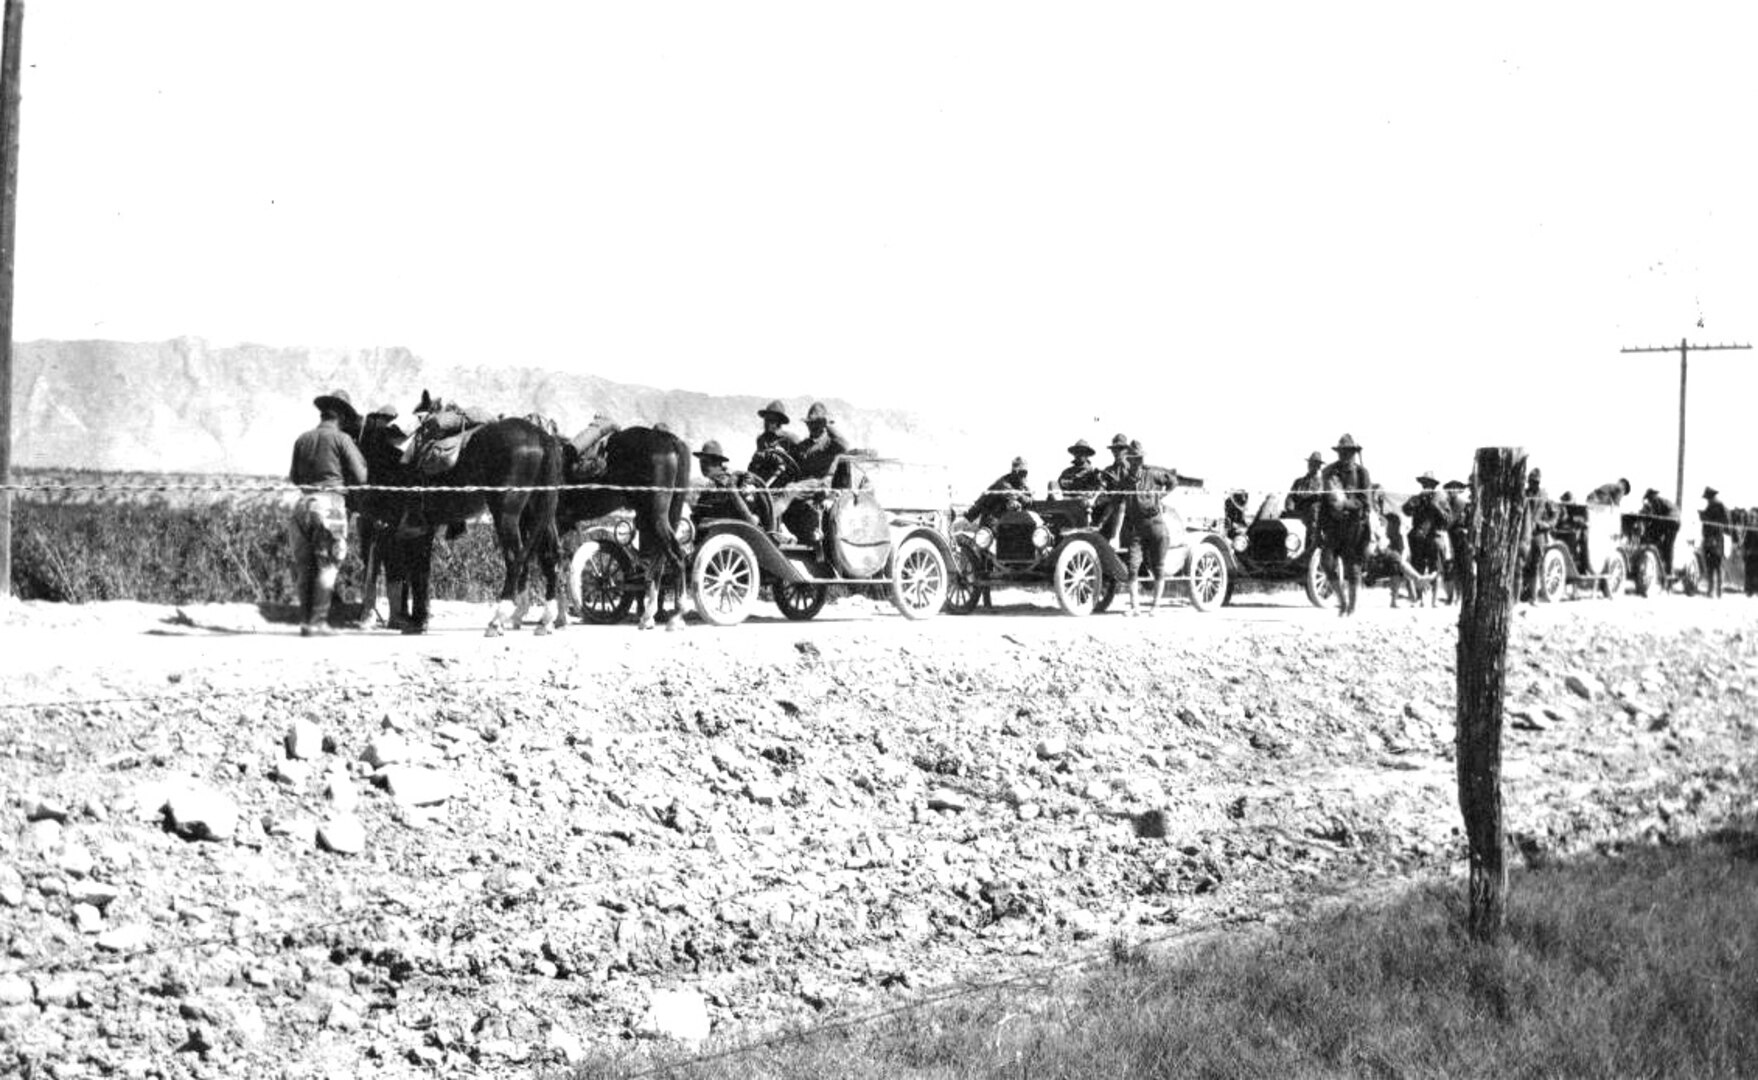 Kentucky National Guardsmen on patrol on horseback and by automobile along a roadway outside El Paso, Texas, circa 1916. June 18, 2016, is the 100th anniversary of the “Great Mobilization” order of the National Guard to the U.S.-Mexico Border. 